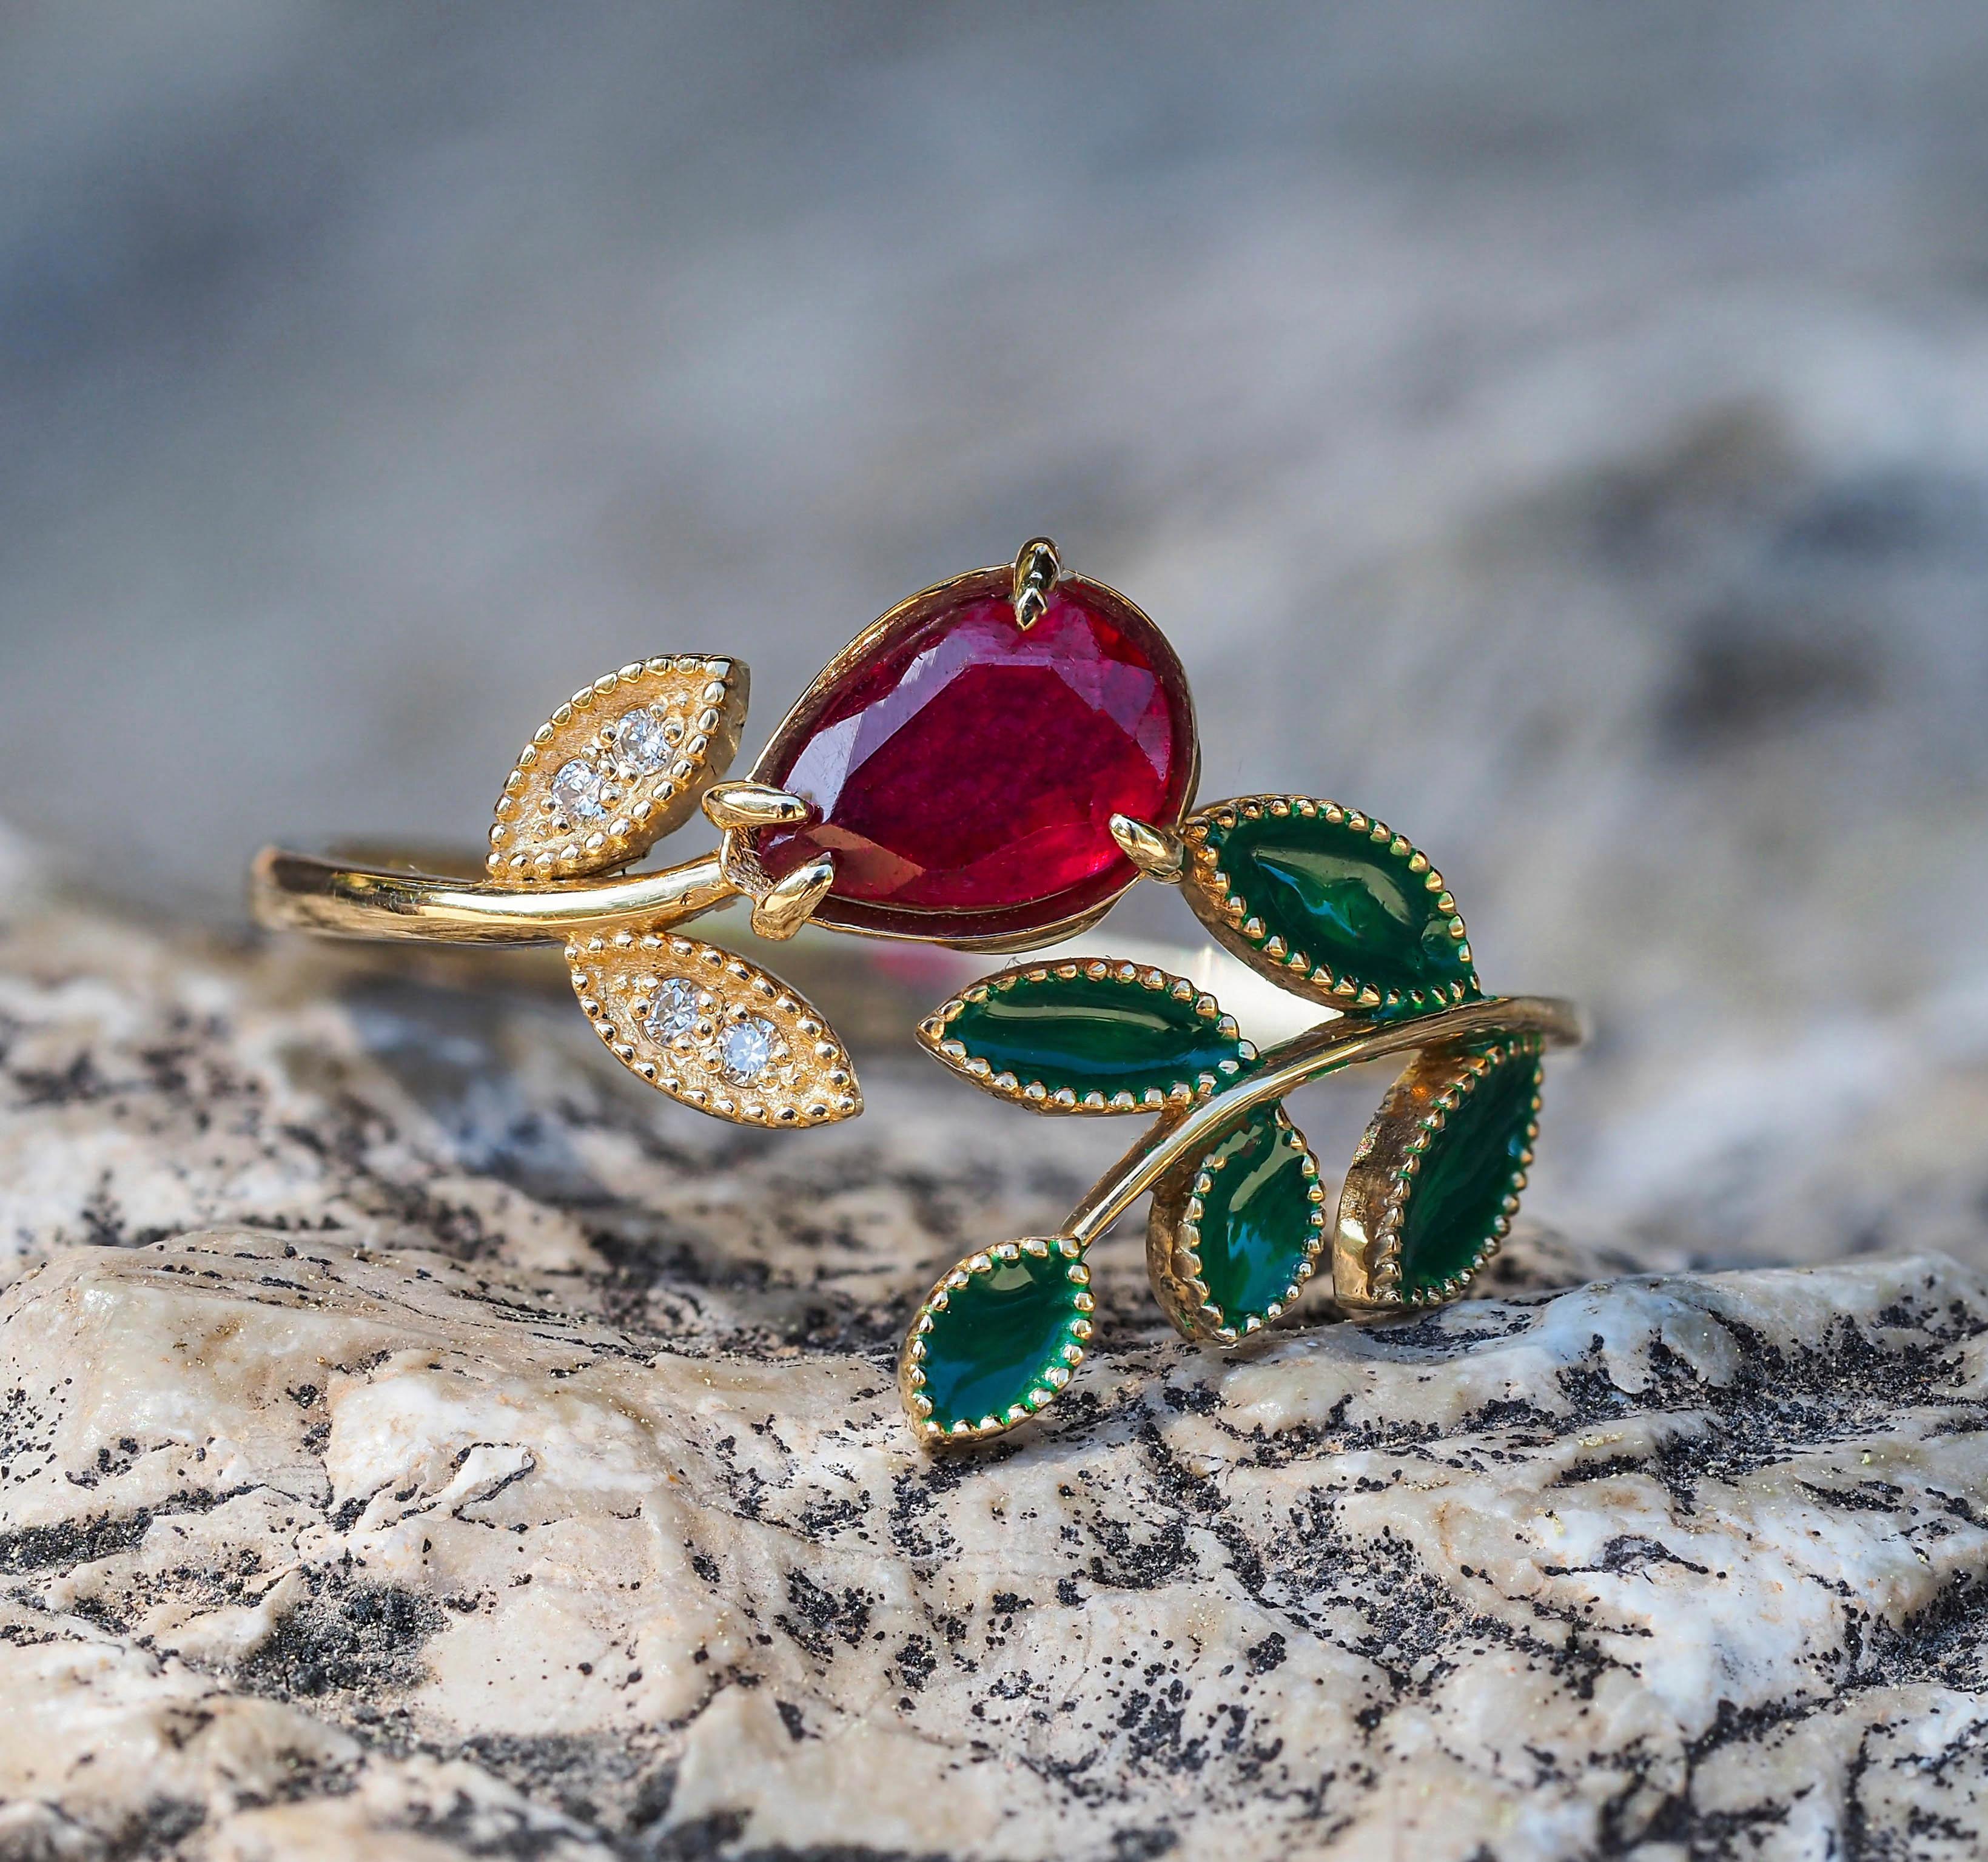 Flower ring with ruby in 14k gold. 
Pear ruby ring. Berry ring with ruby. Gold Leaves ring with diamonds. Open Ended Ring with ruby.

Metal: 14k gold
Weight: 2.3 g. depends from size.

Set with ruby.
Pear shape, approx 0.9 ct, deep red color depends